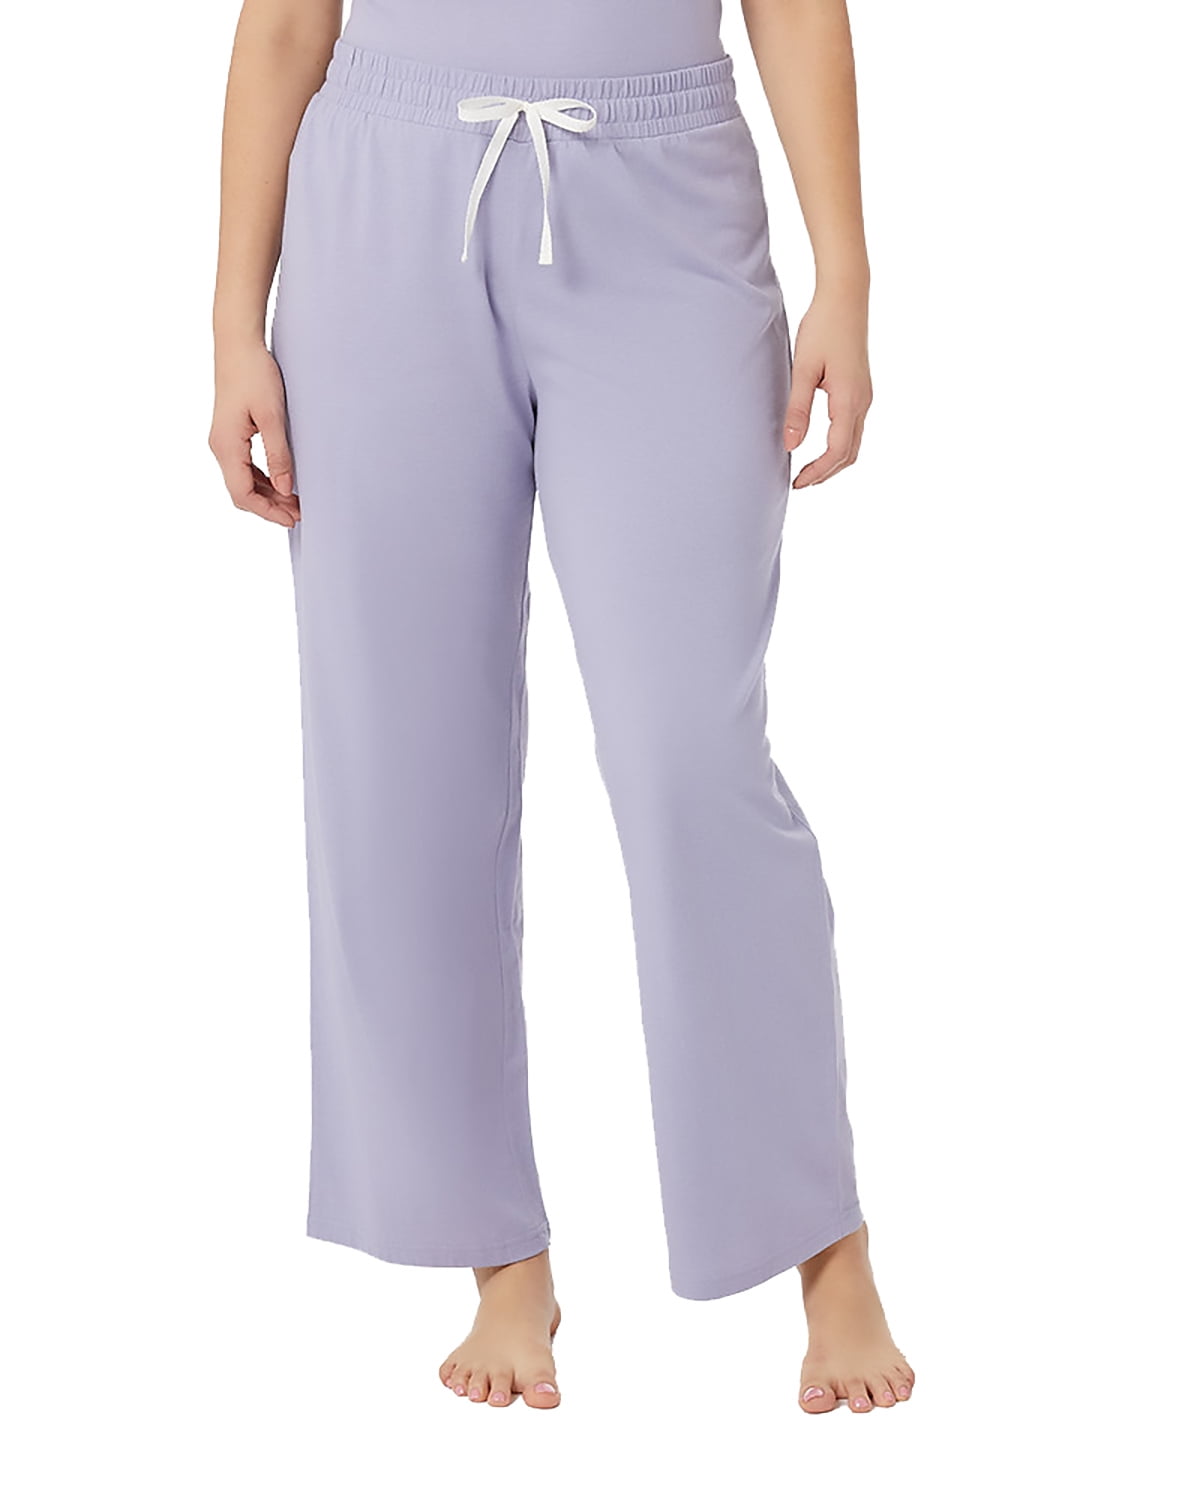 2 Pack 32 Degrees Women's Cool Lightweight Soft Cotton Sleep Pant - Icy  Blue - X-Large 